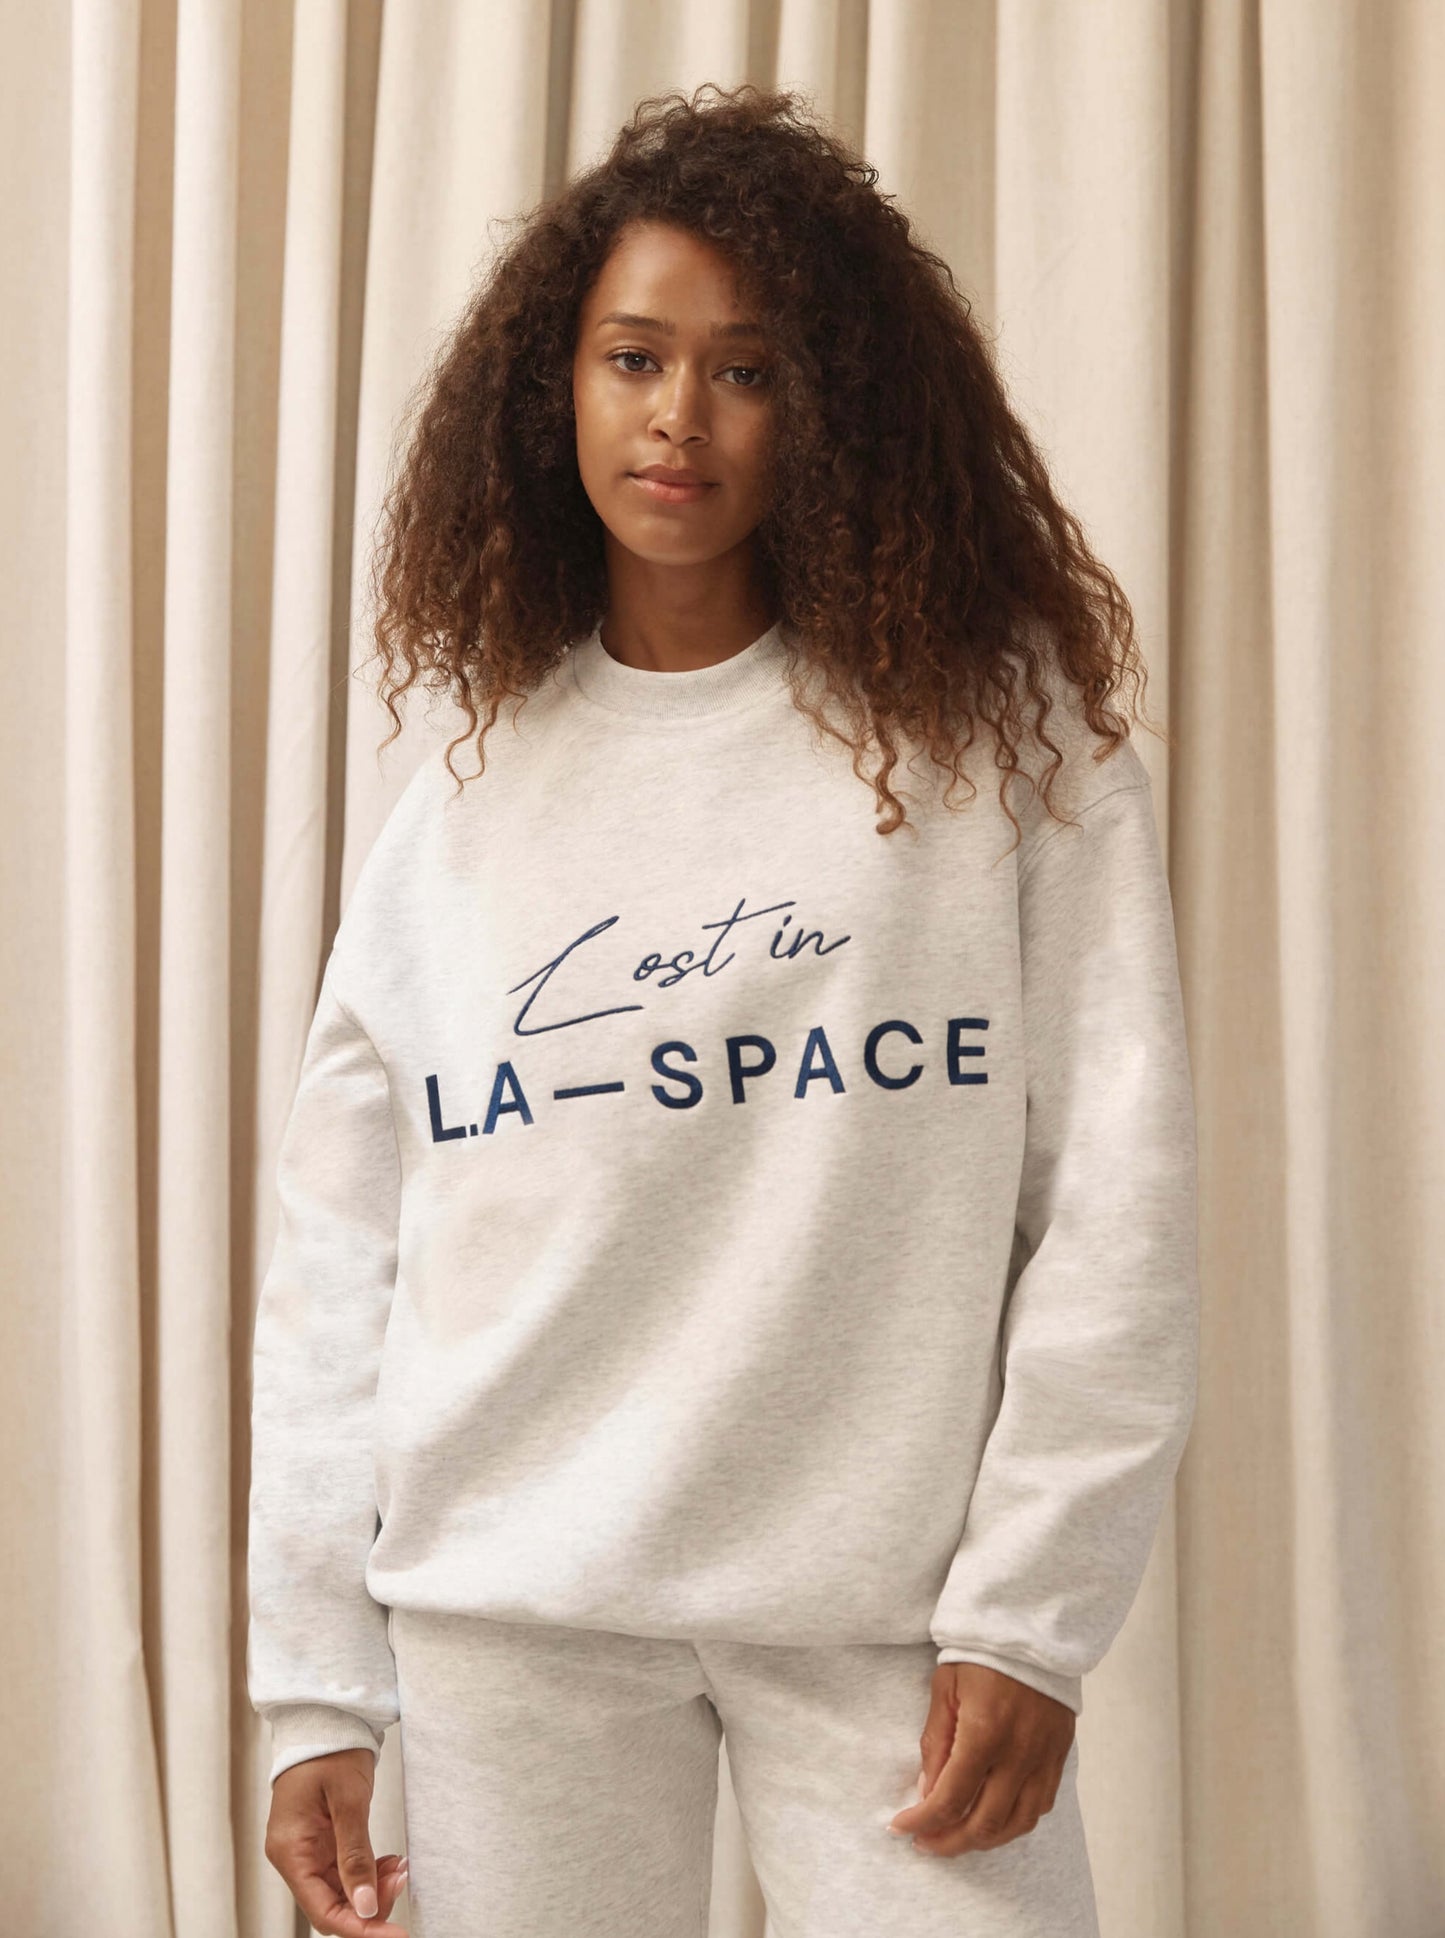 'LOST IN L.A-SPACE' EMBROIDERED SWEATSHIRT IN LIGHT GREY MARL